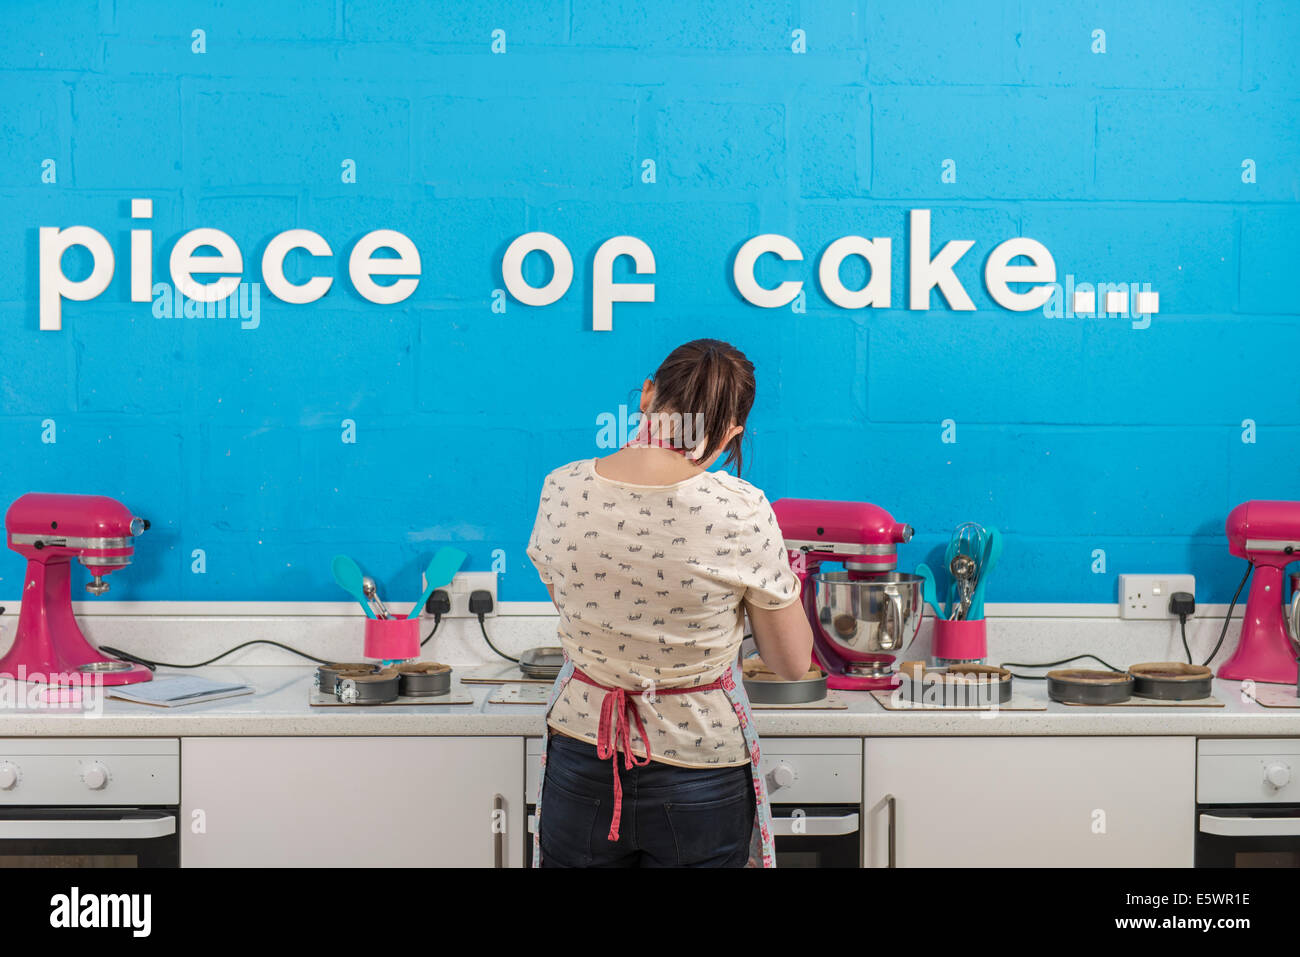 Rear view of young woman using blender in bakery Stock Photo